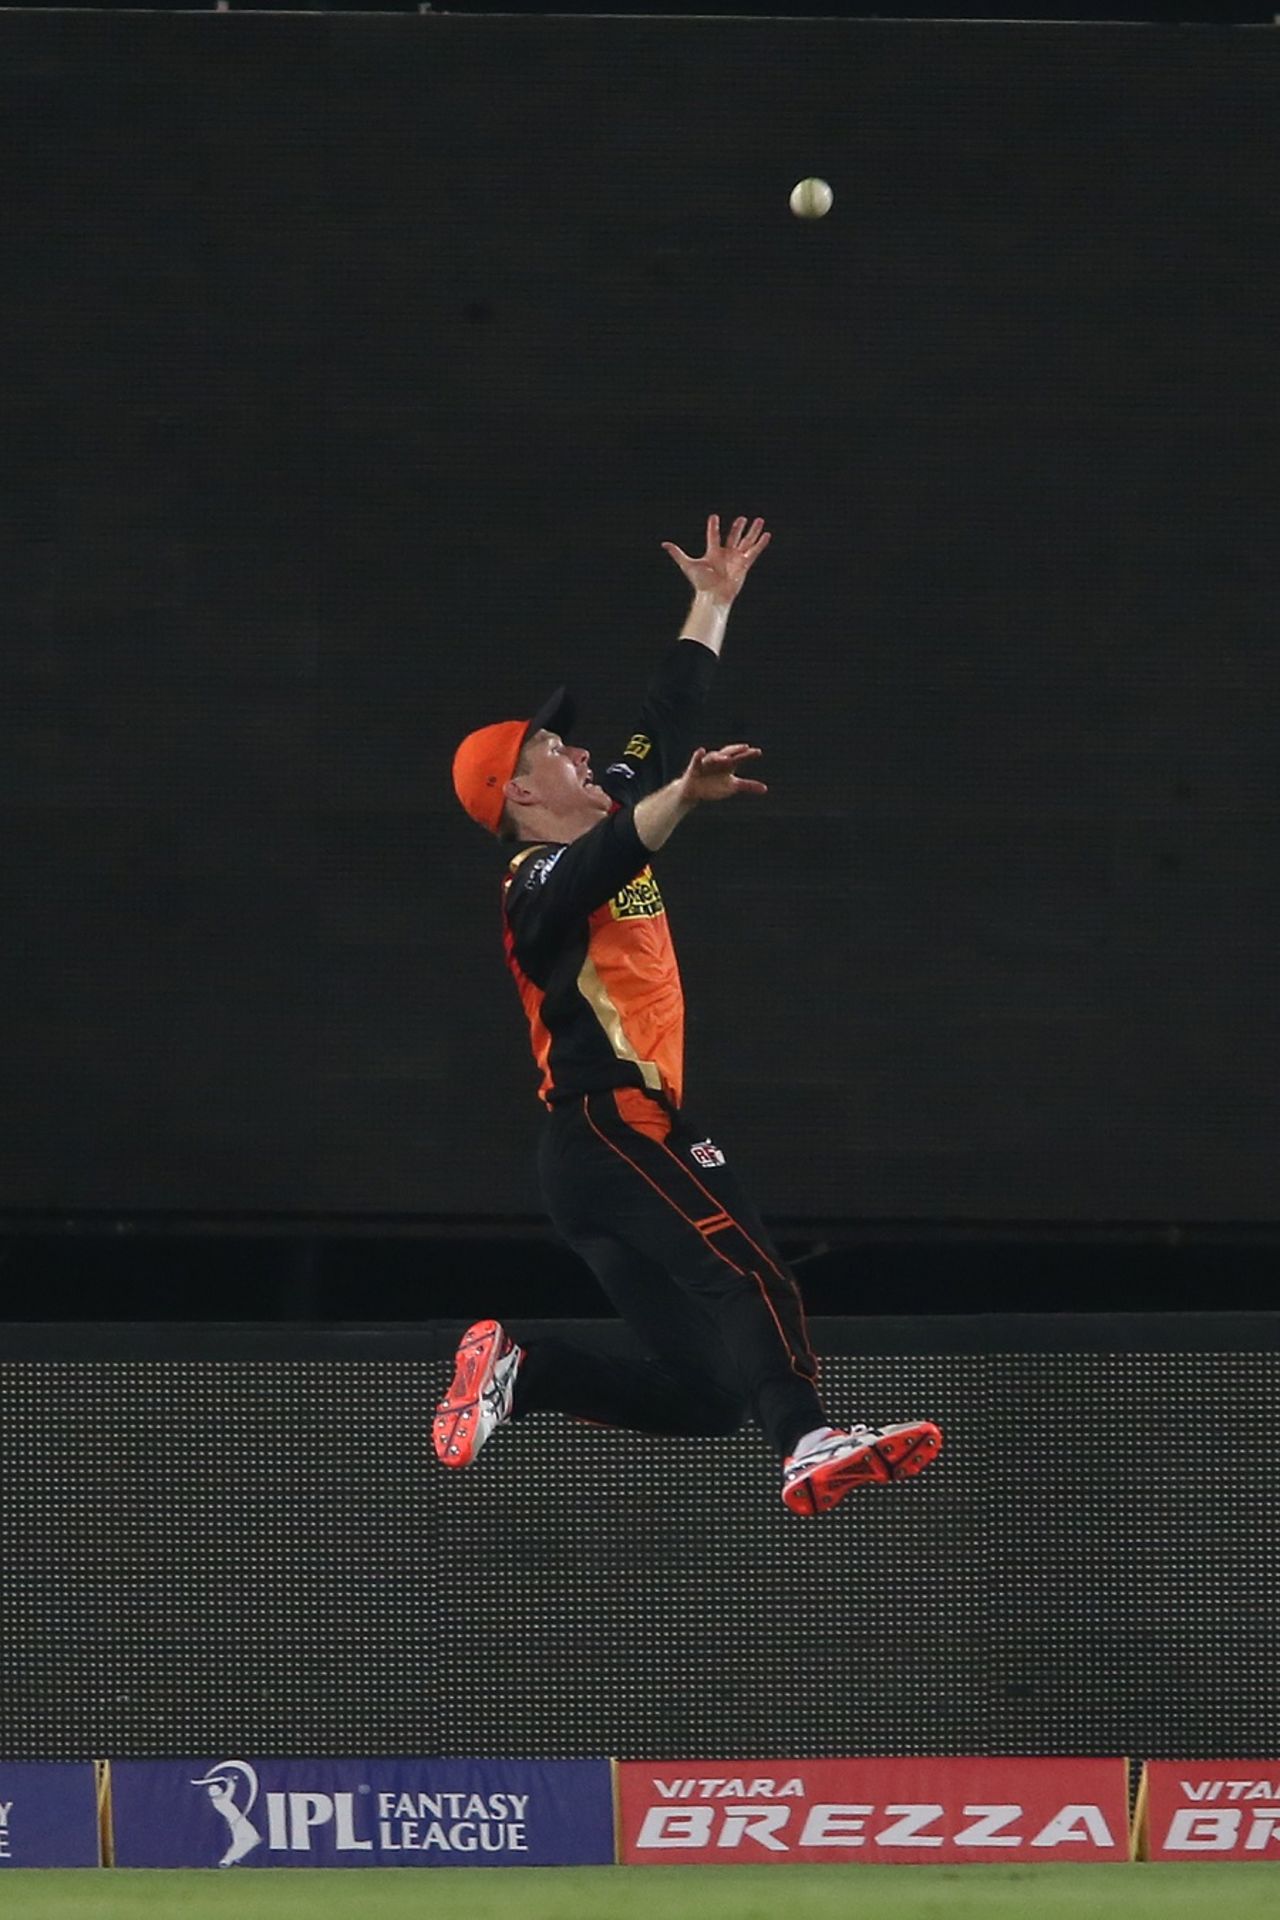 Eoin Morgan jumps up with outstretched hands in a bid to prevent a six, Sunrisers Hyderabad v Mumbai Indians, IPL 2016, Hyderabad, April 18, 2016